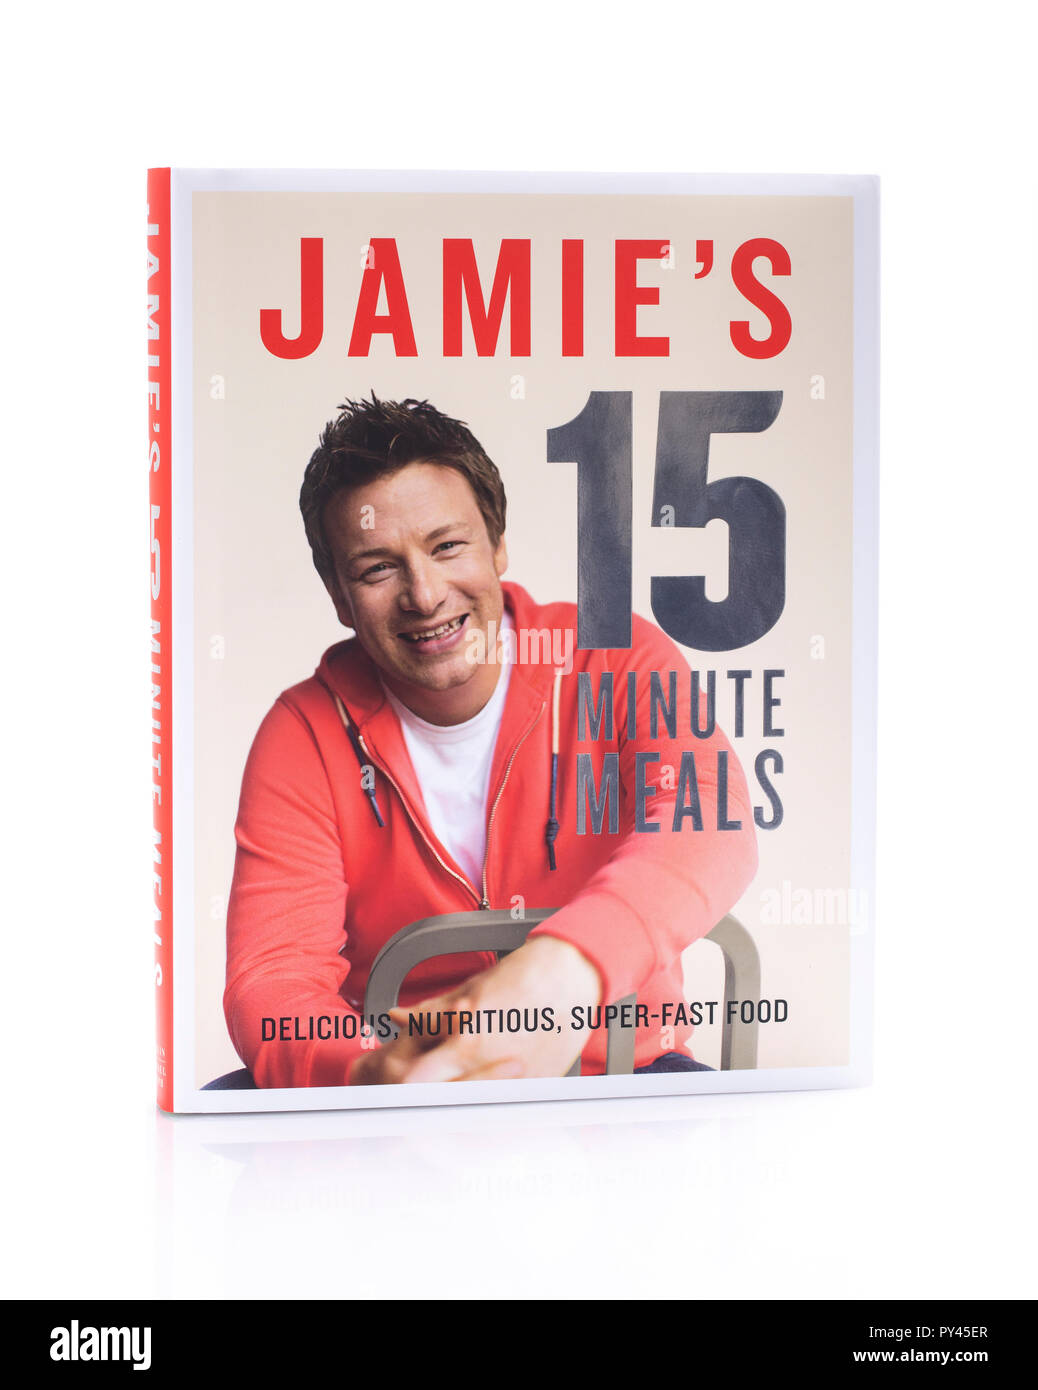 SWINDON, UK - OCTOBER 25, 2018: Jamies 15 Minute Meals Book, Delicious, Nutritious, Super-Fast Food on a white background Stock Photo